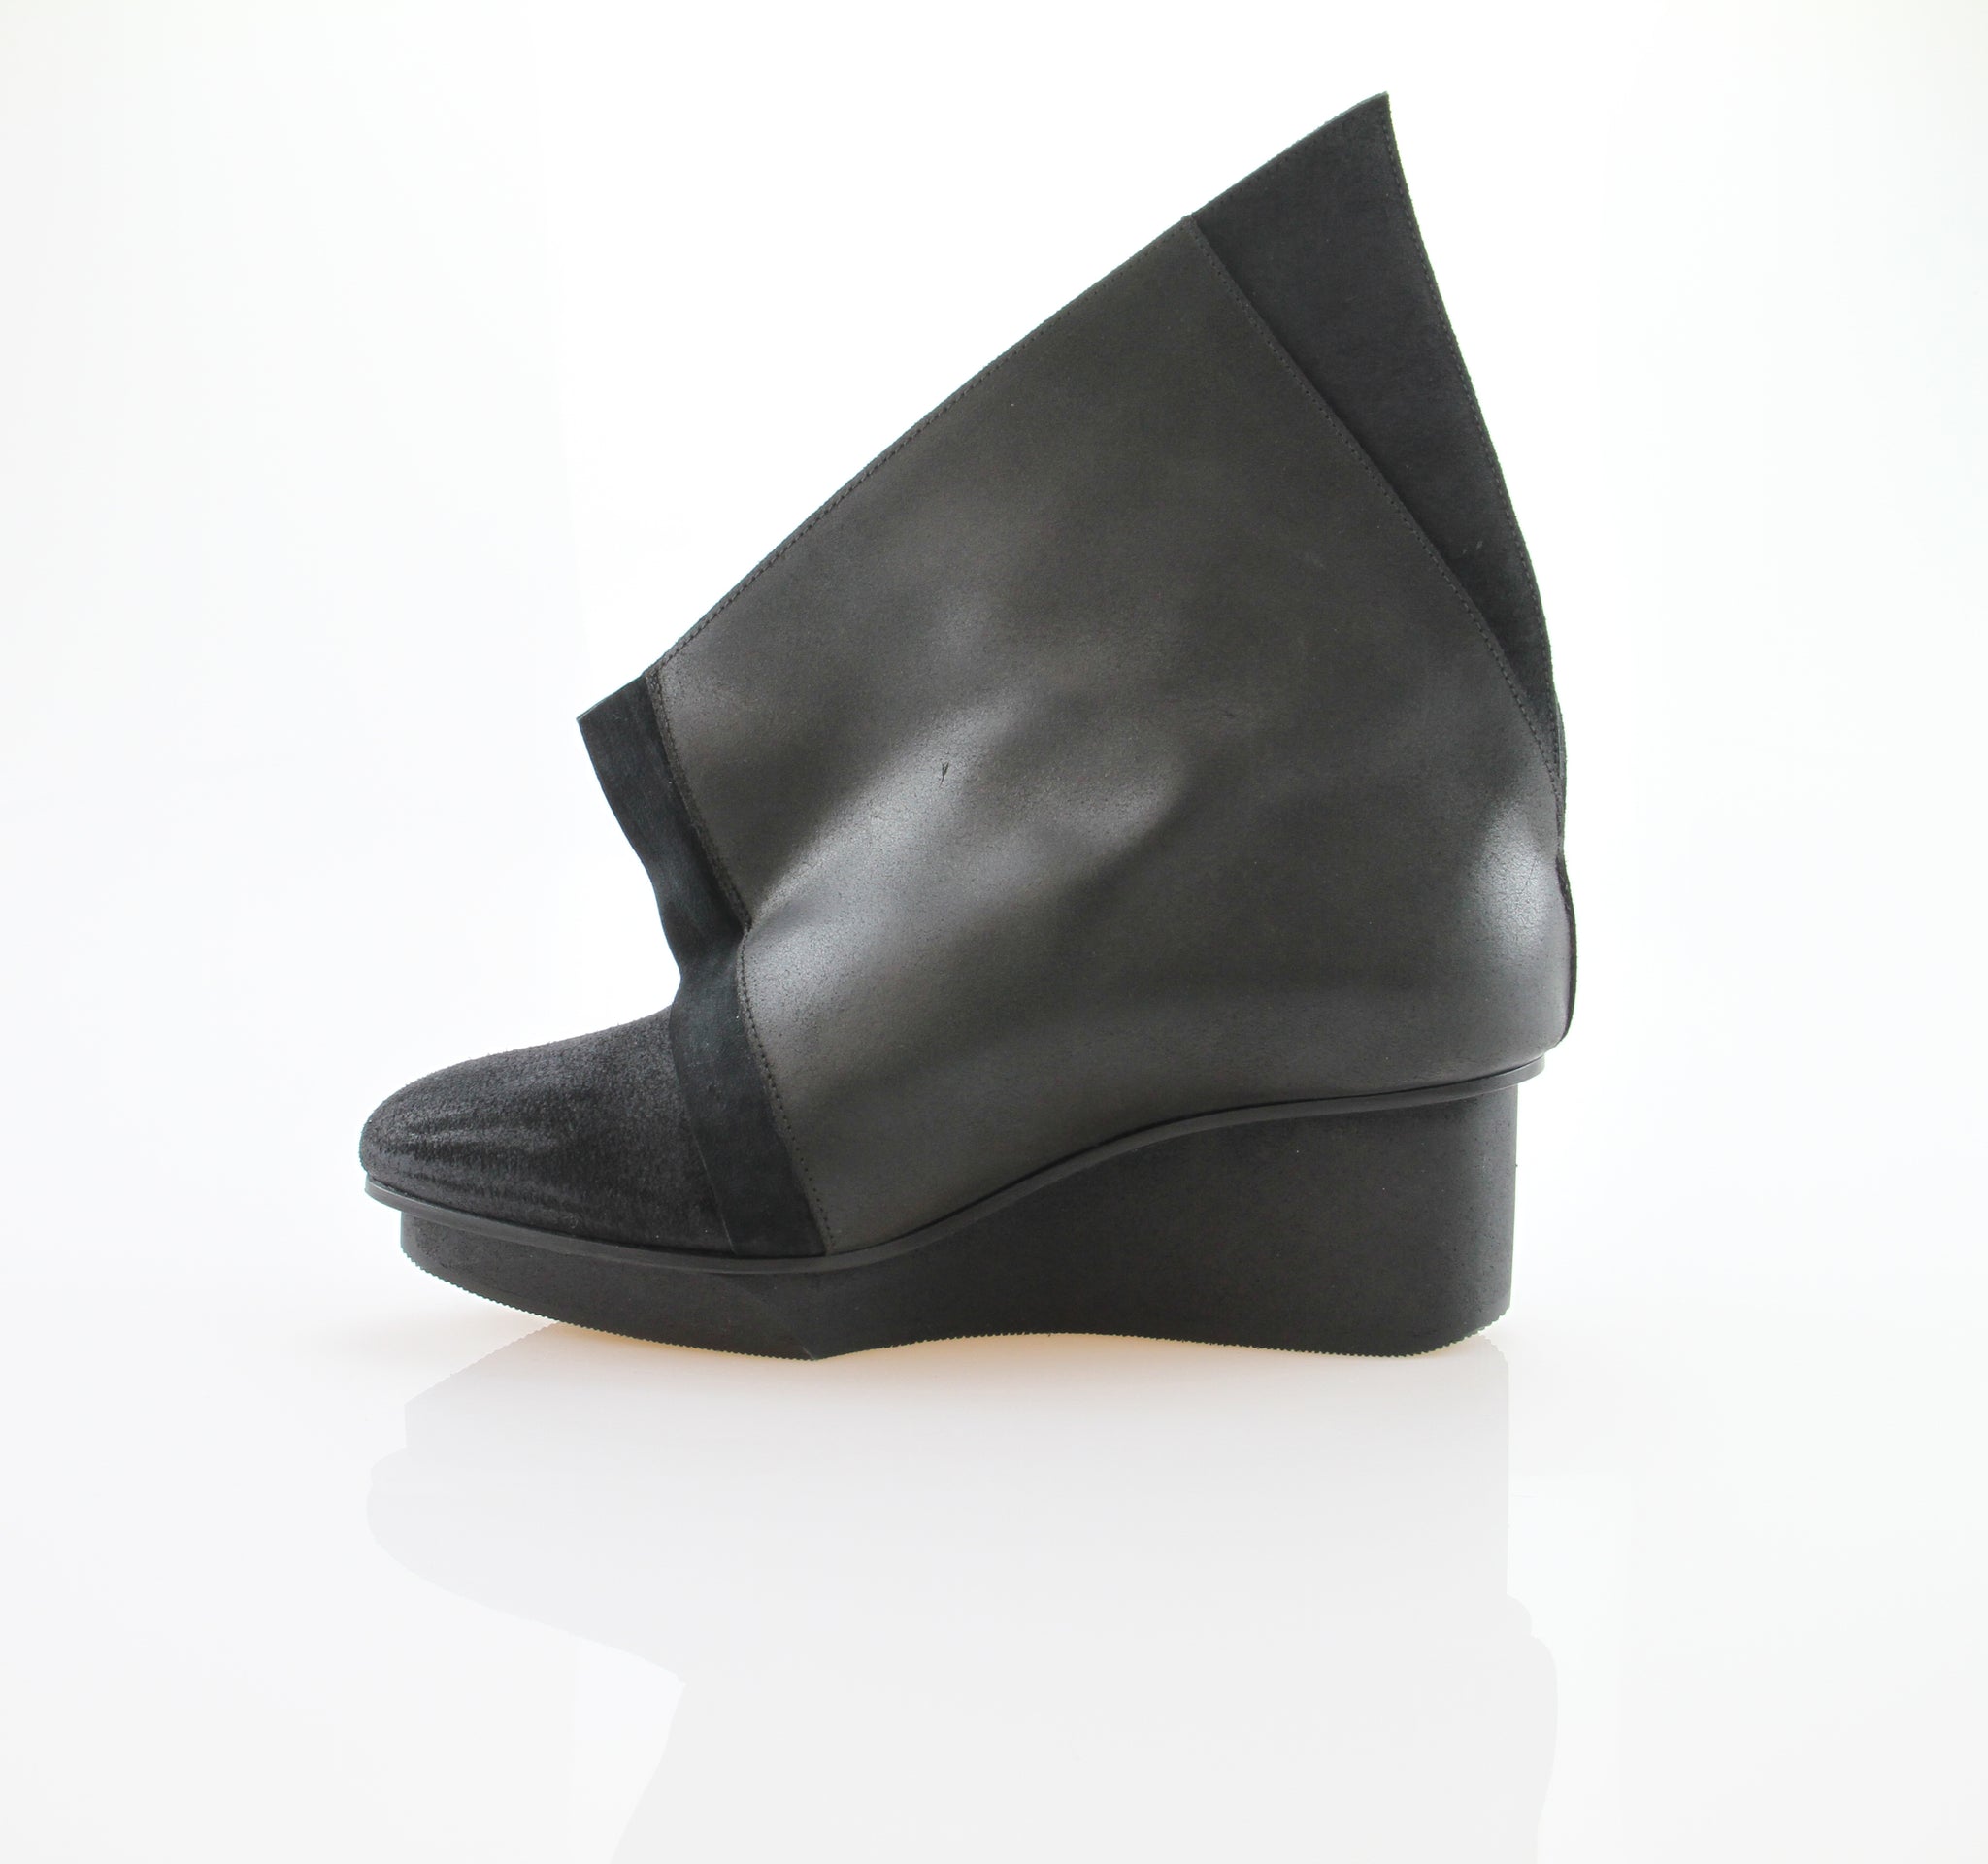 TRIPTYCH WOMEN'S BLACK LEATHER WEDGE ANKLE BOOT